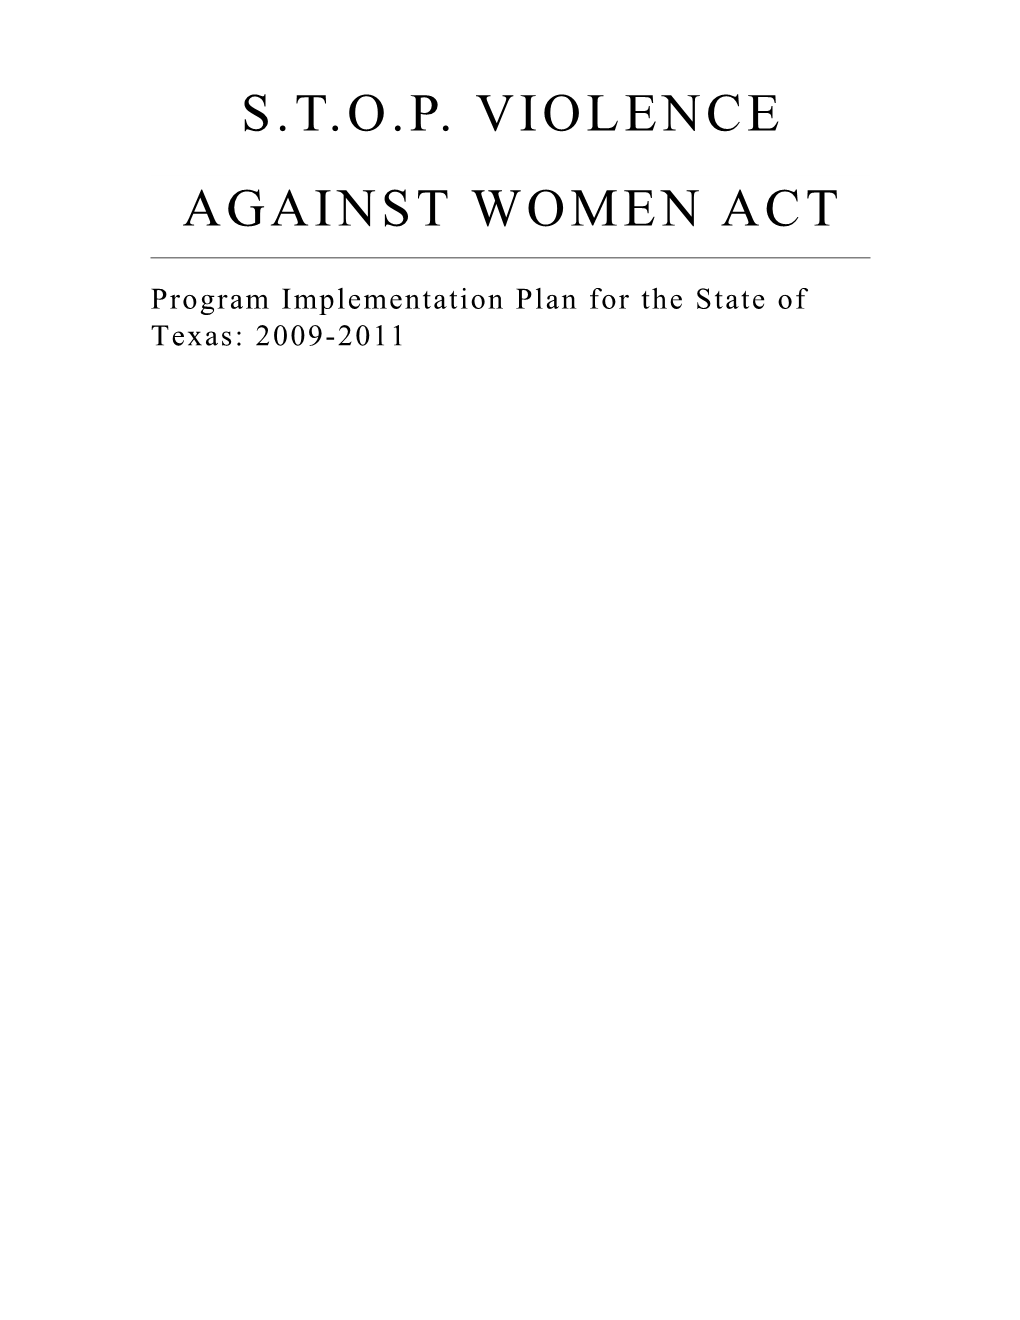 S.T.O.P. Violence Against Women Act